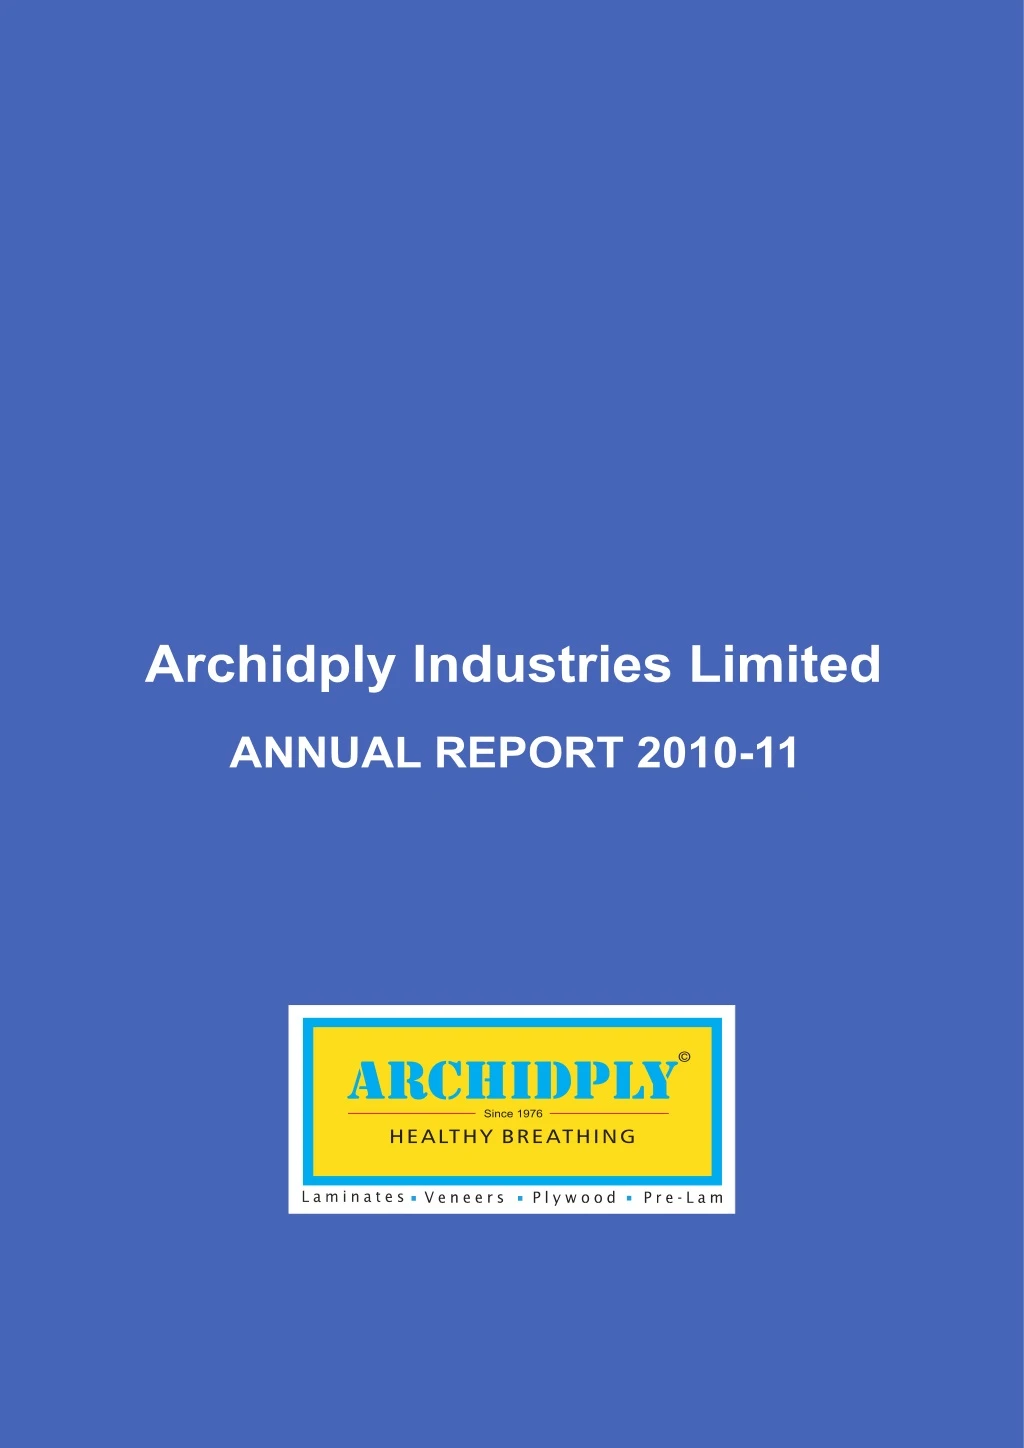 archidply industries limited